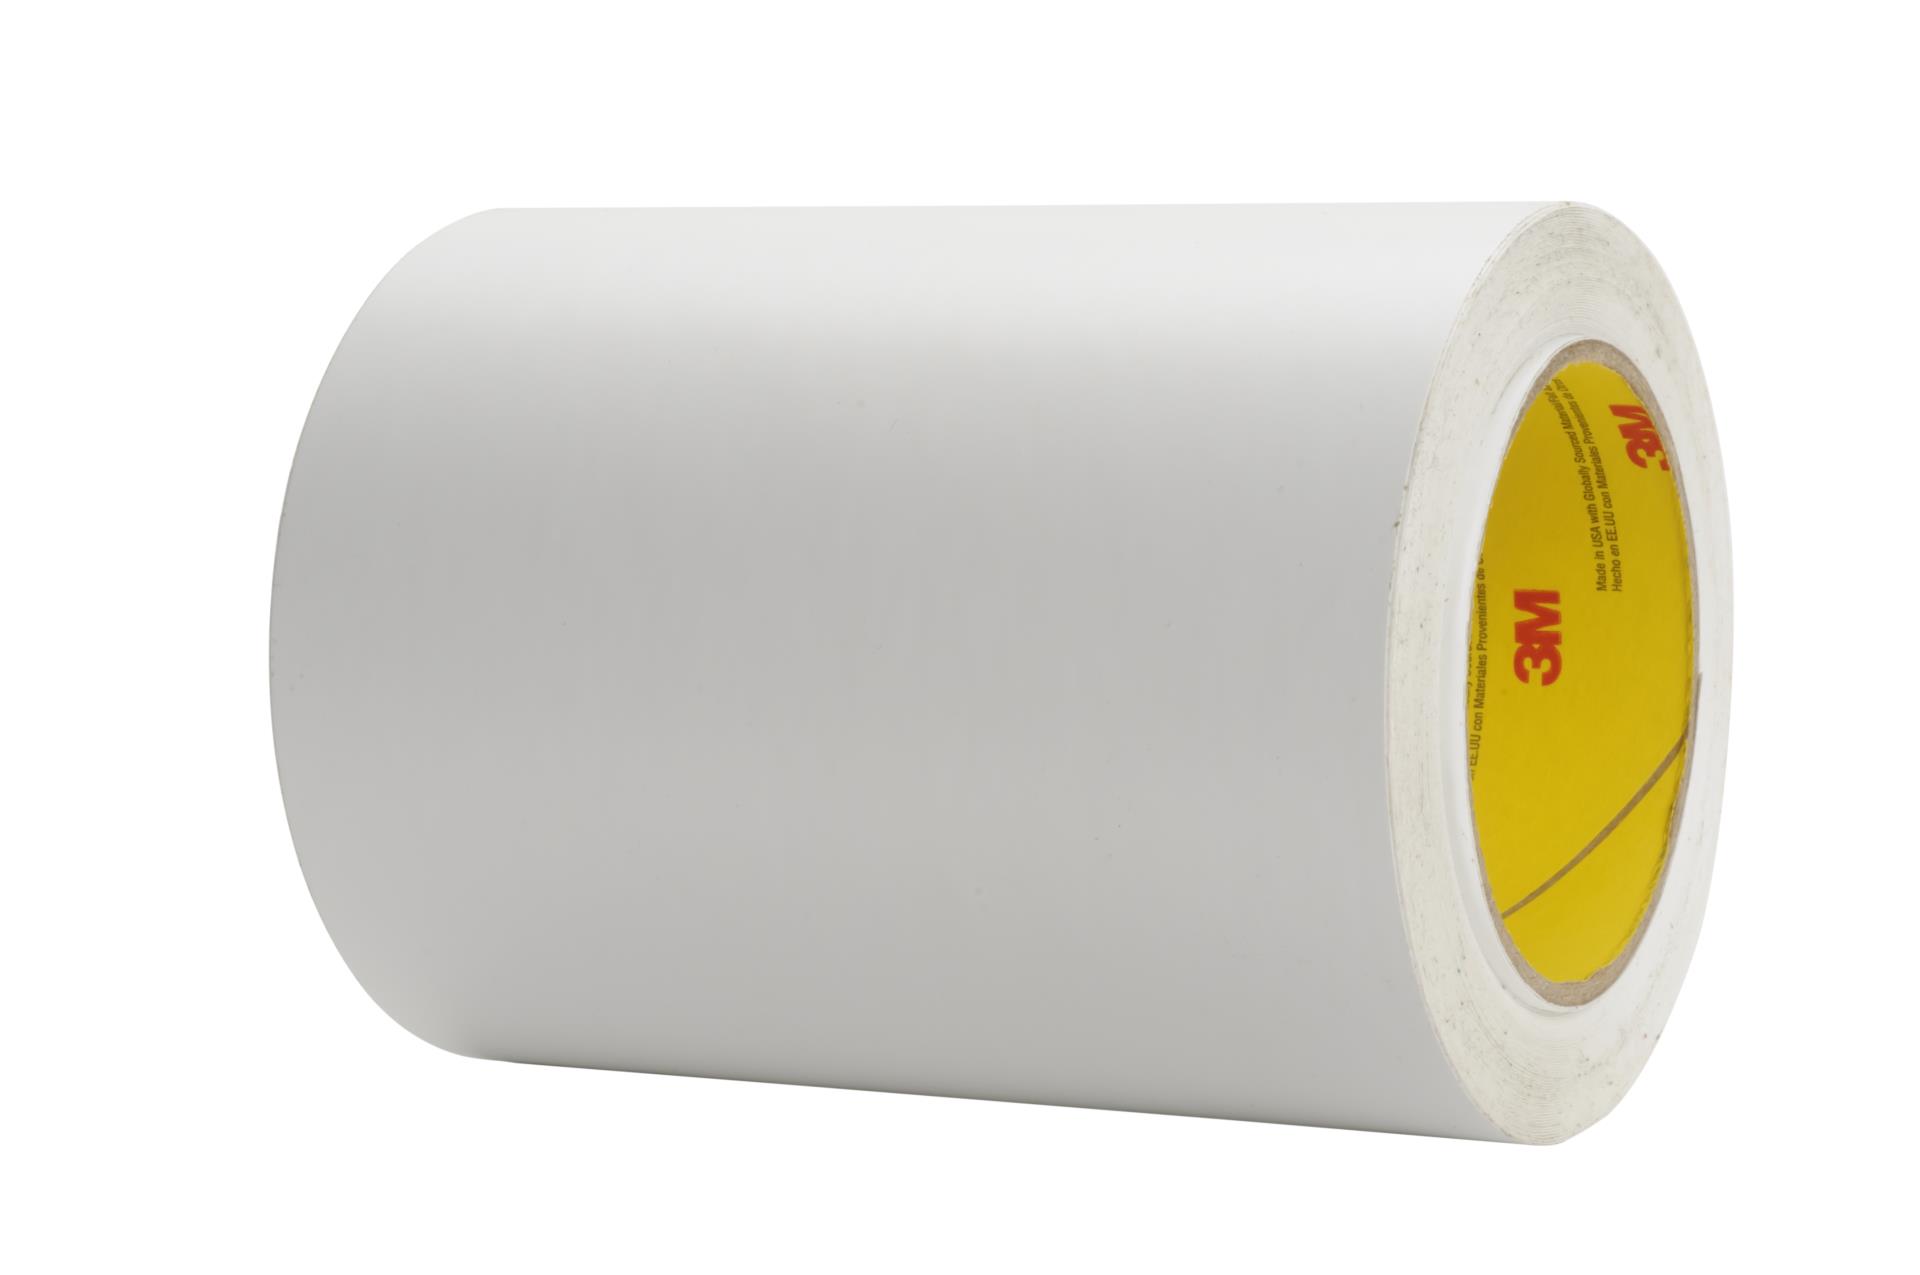 -65 degrees F to 450 degrees F Pack of 25 6 Length 4 Width 3M 361 4 x 6-25 White Glass Cloth/Silicone Adhesive Electrical Tape 6 Length 3M 361 4 x 6-25 Pack of 25 4 Width 